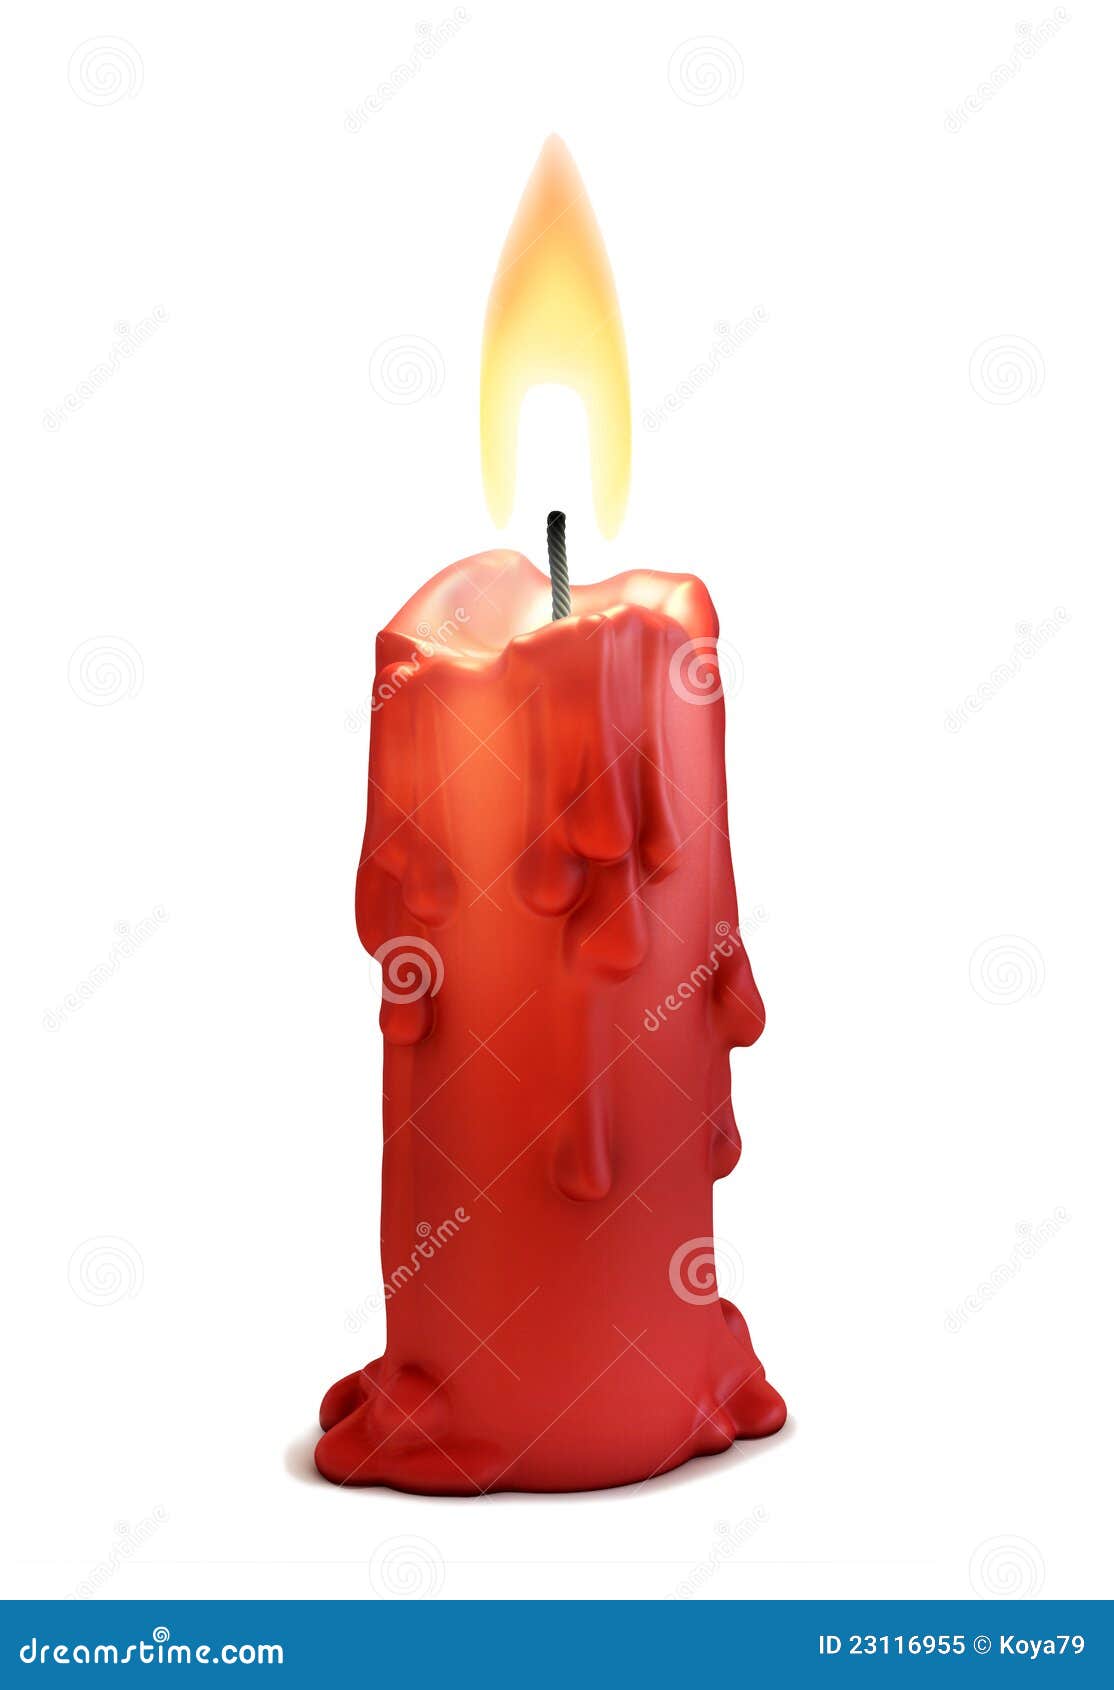 Burning Candle Dripping Or Flowing Wax Realistic Stock